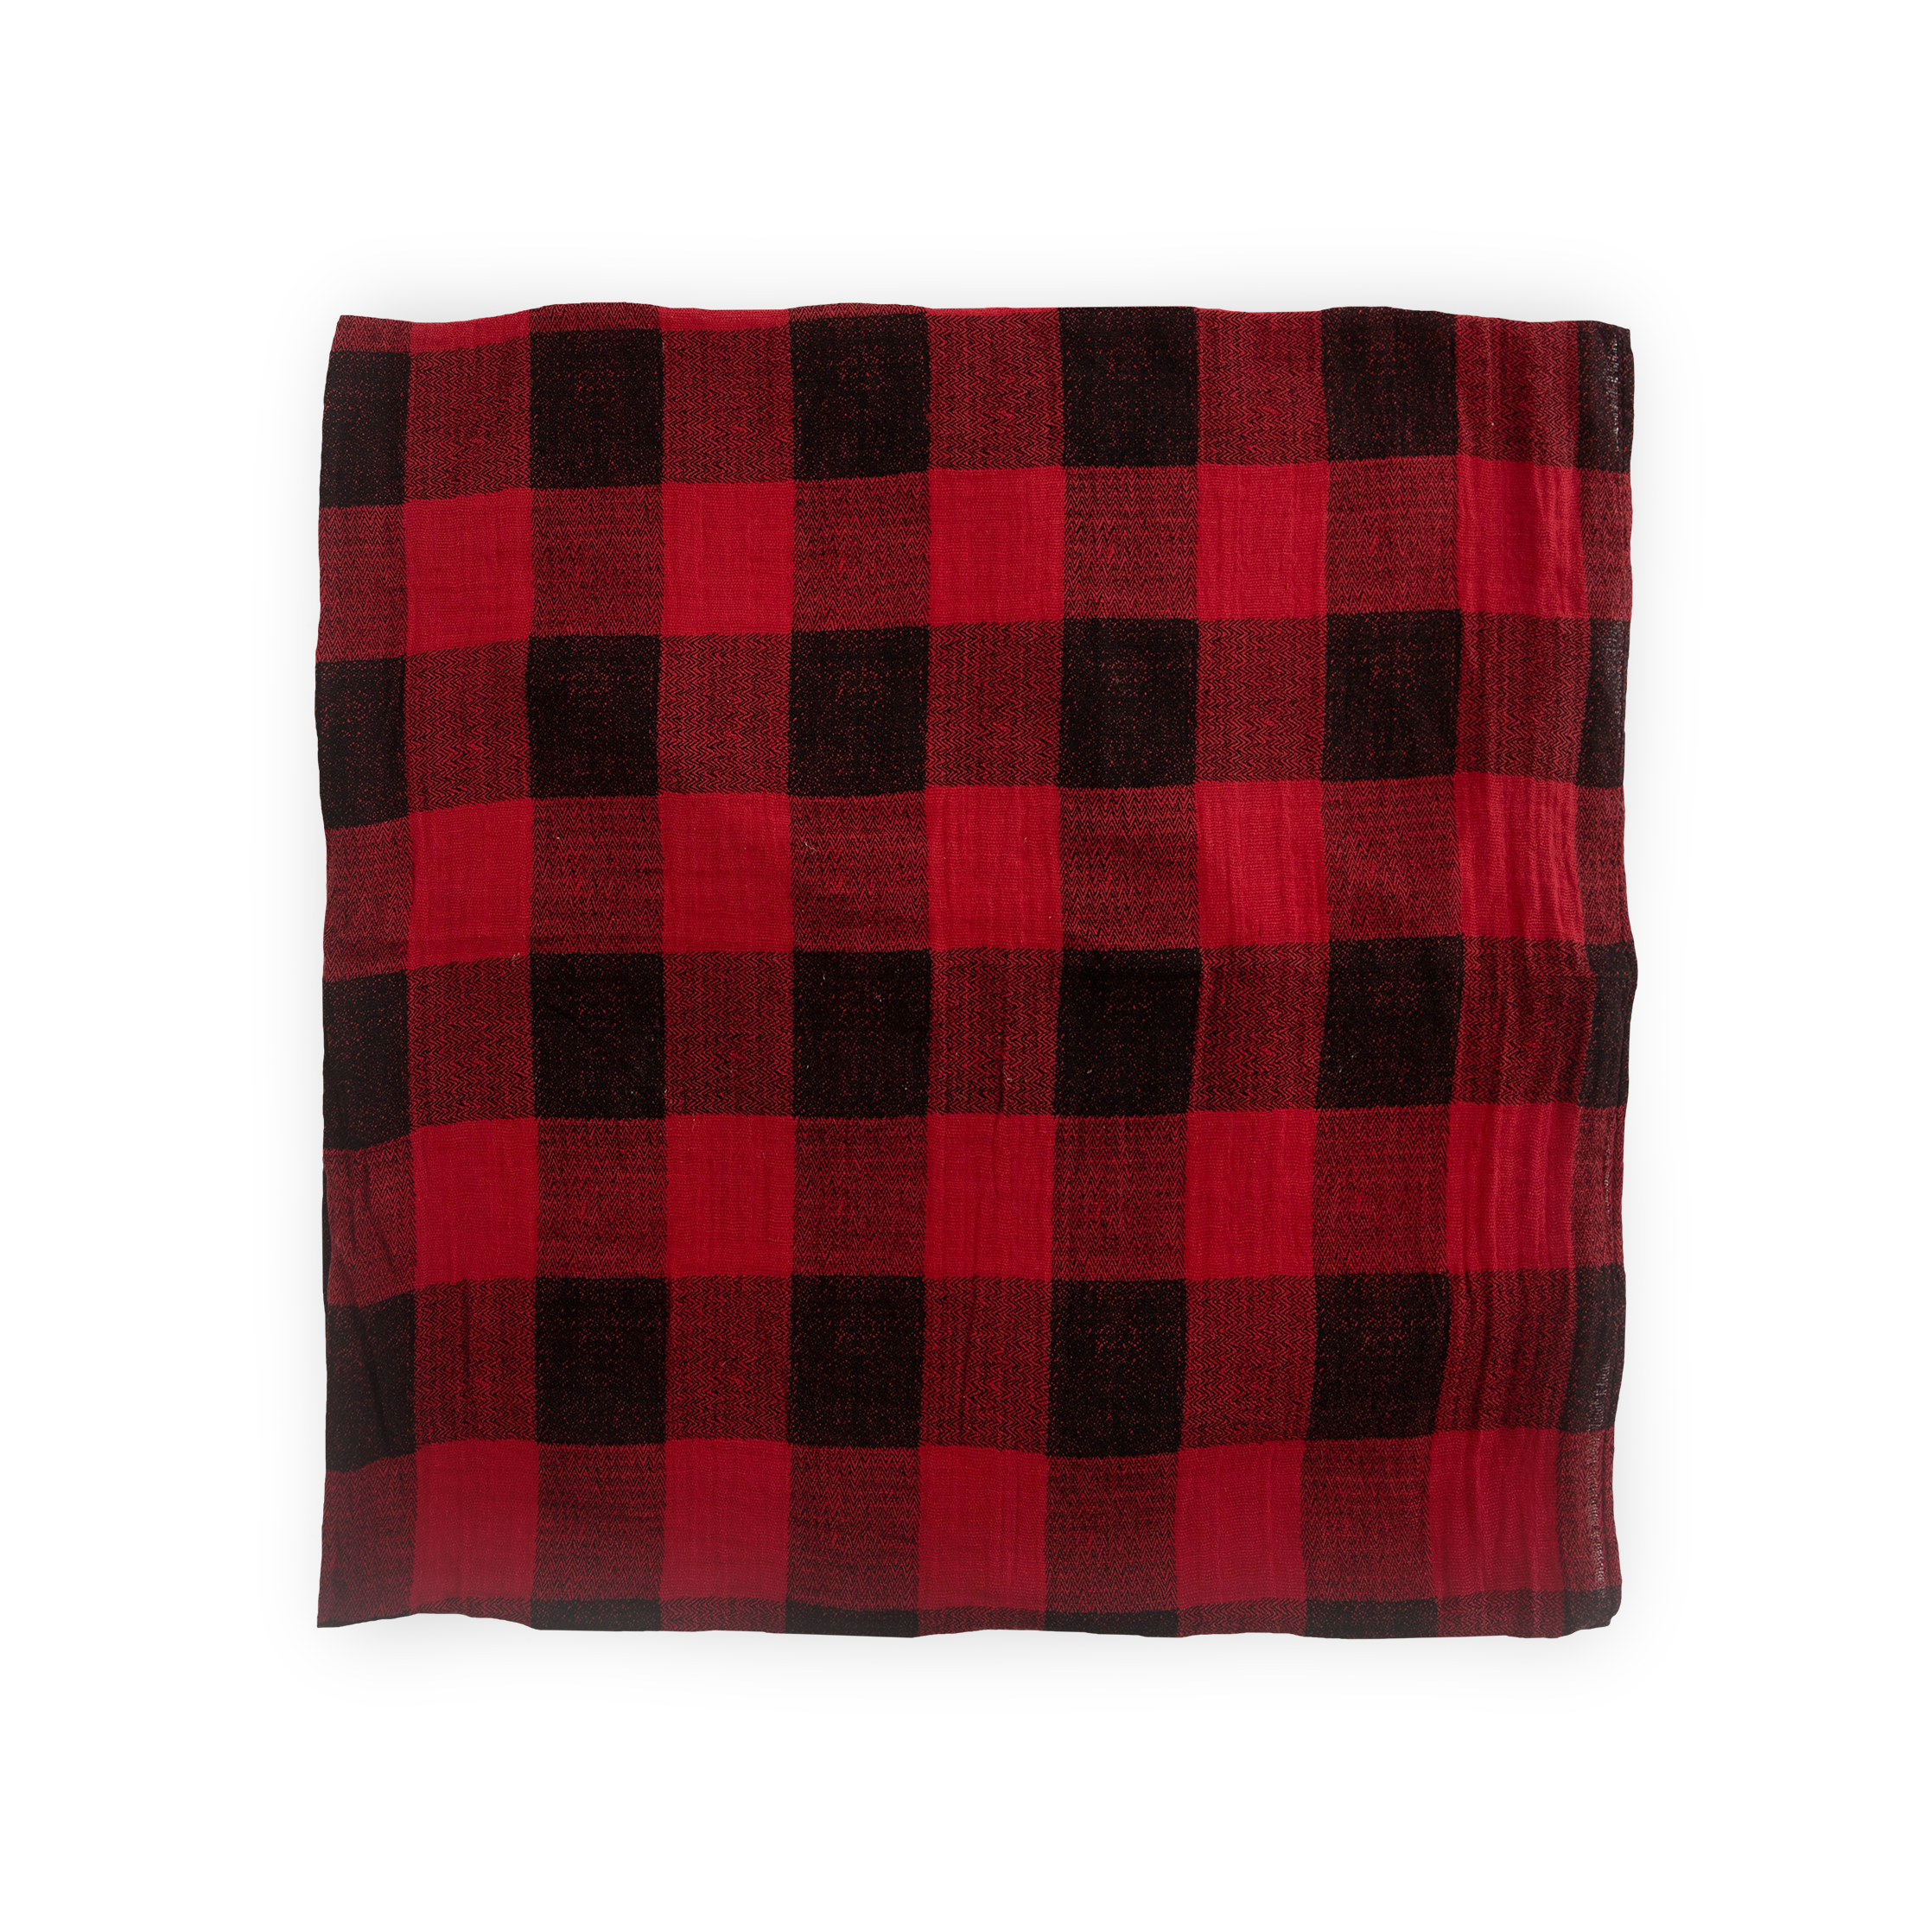 Cotton Muslin Swaddle Blanket - Red Plaid